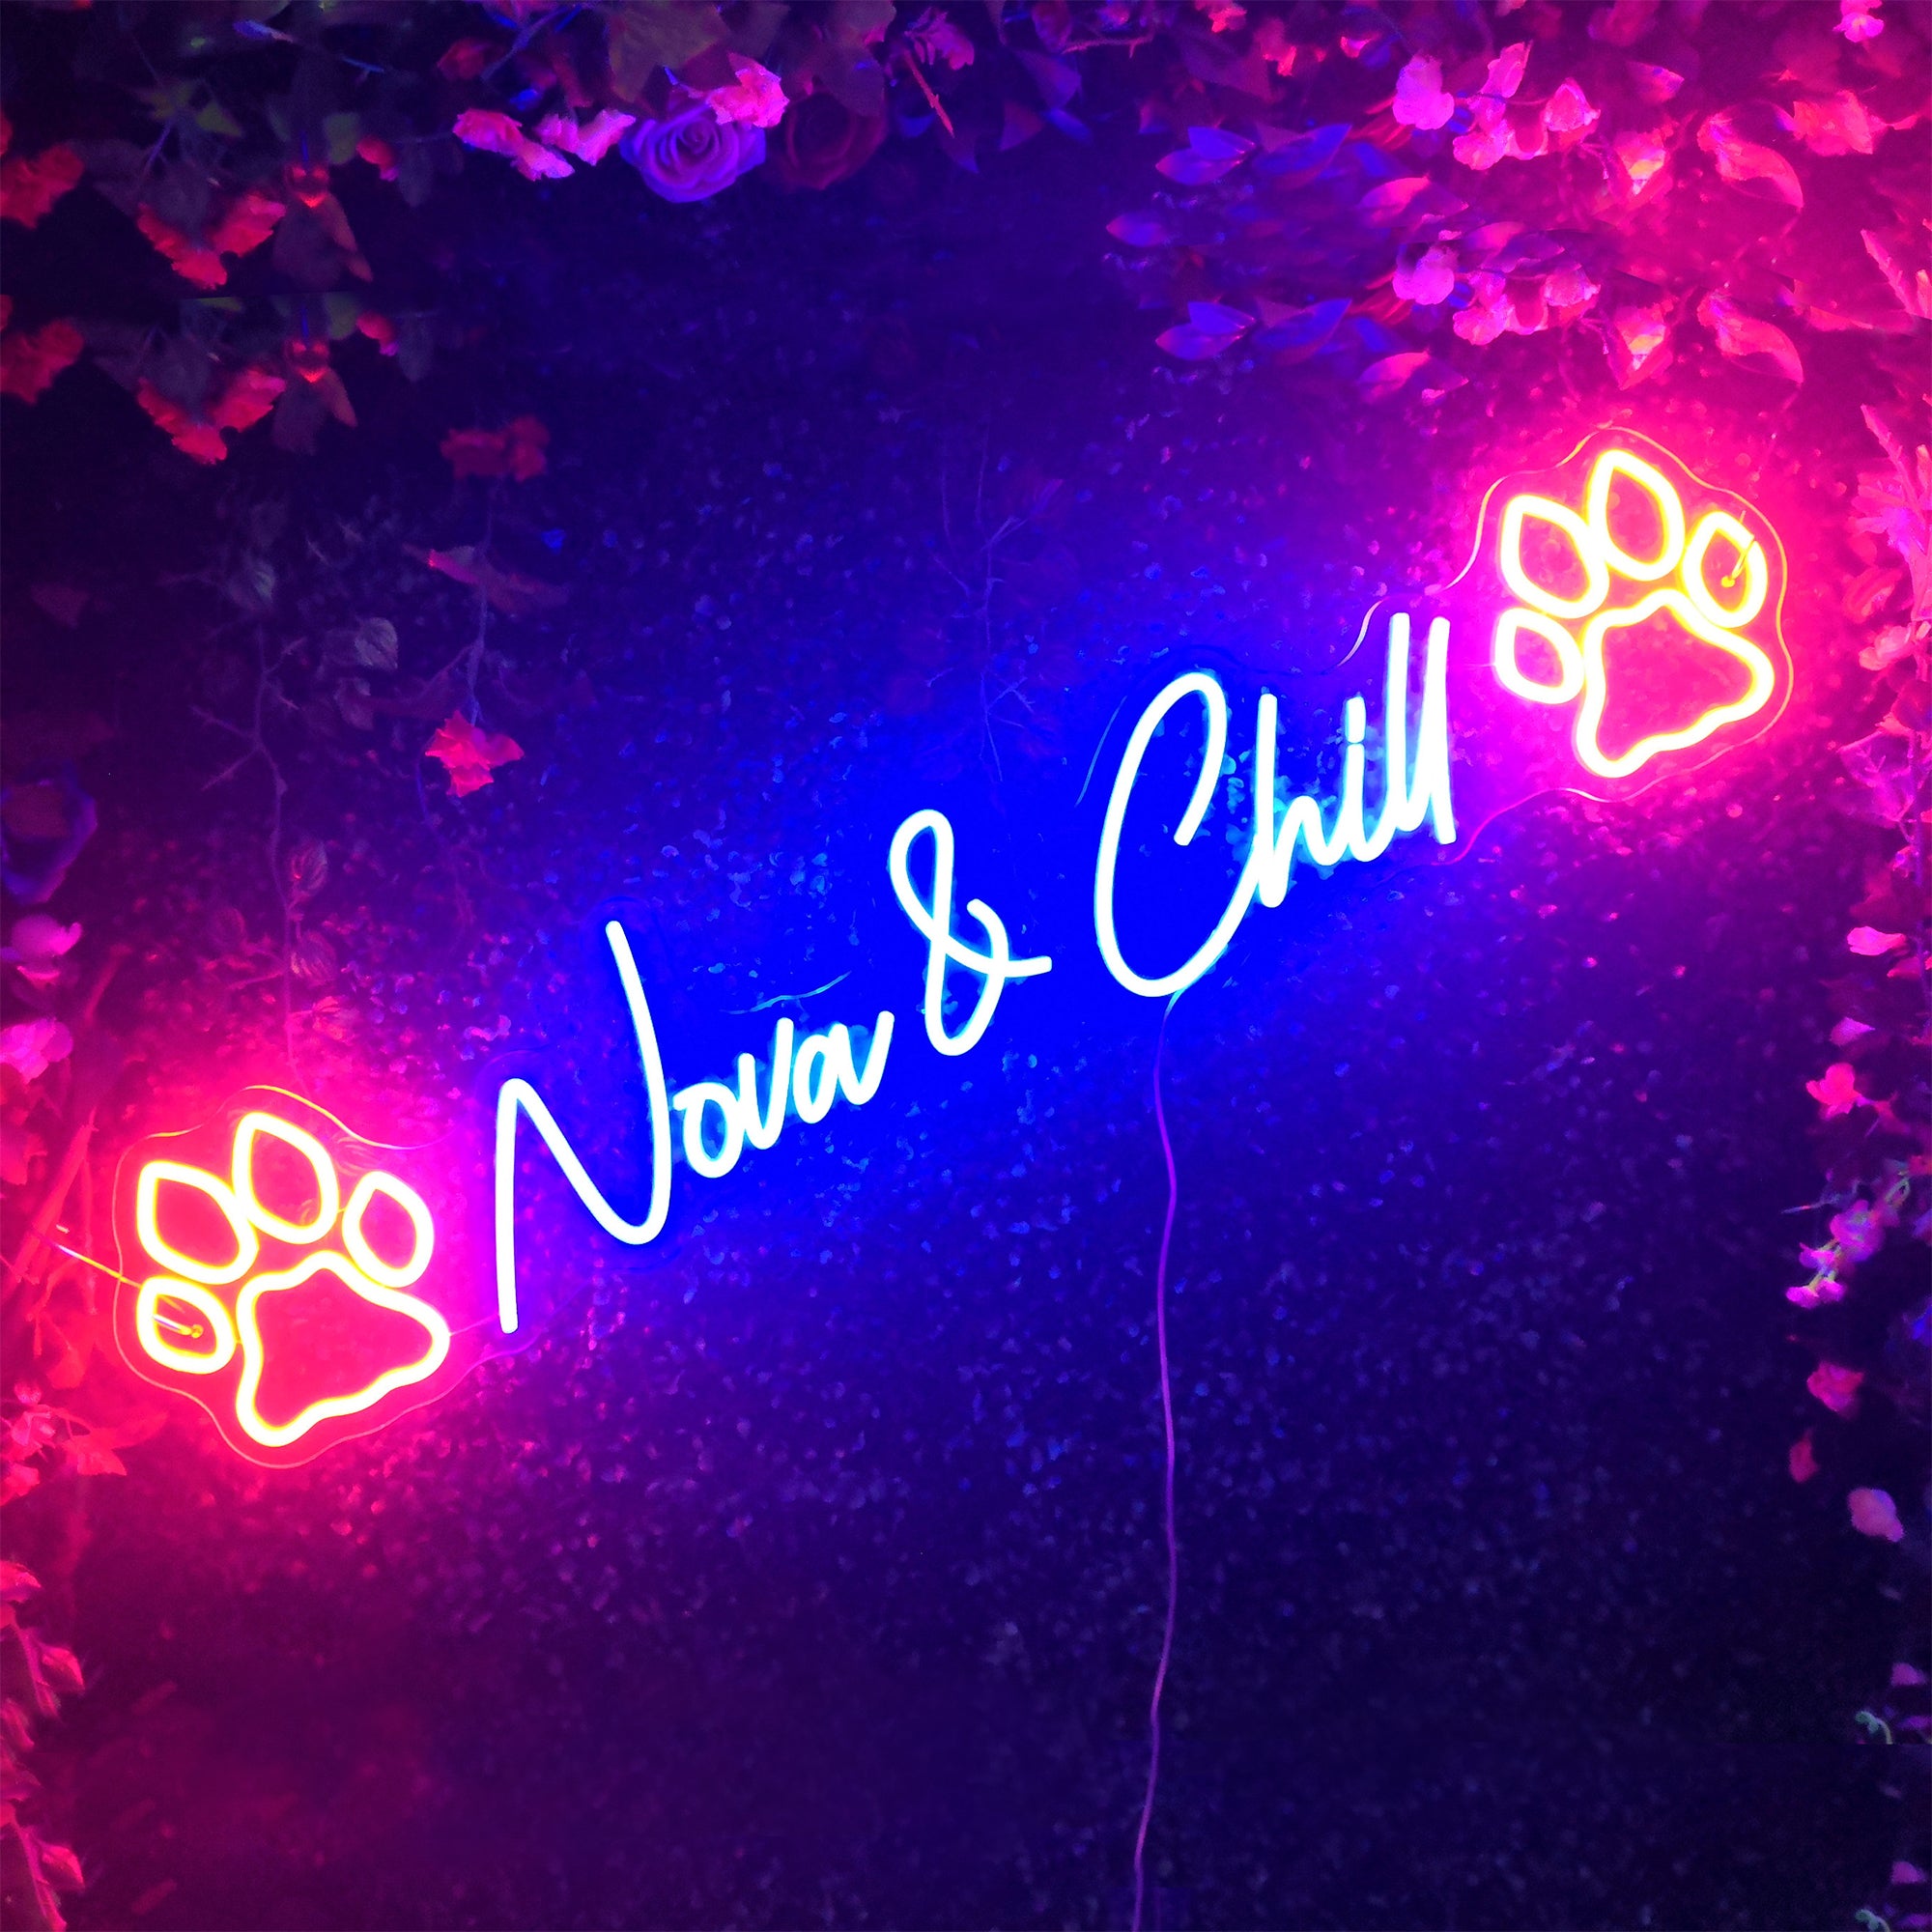 NEONIP - Personalized 100% Handmade Dog Paw LED Neon Sign with Your Pet's Name